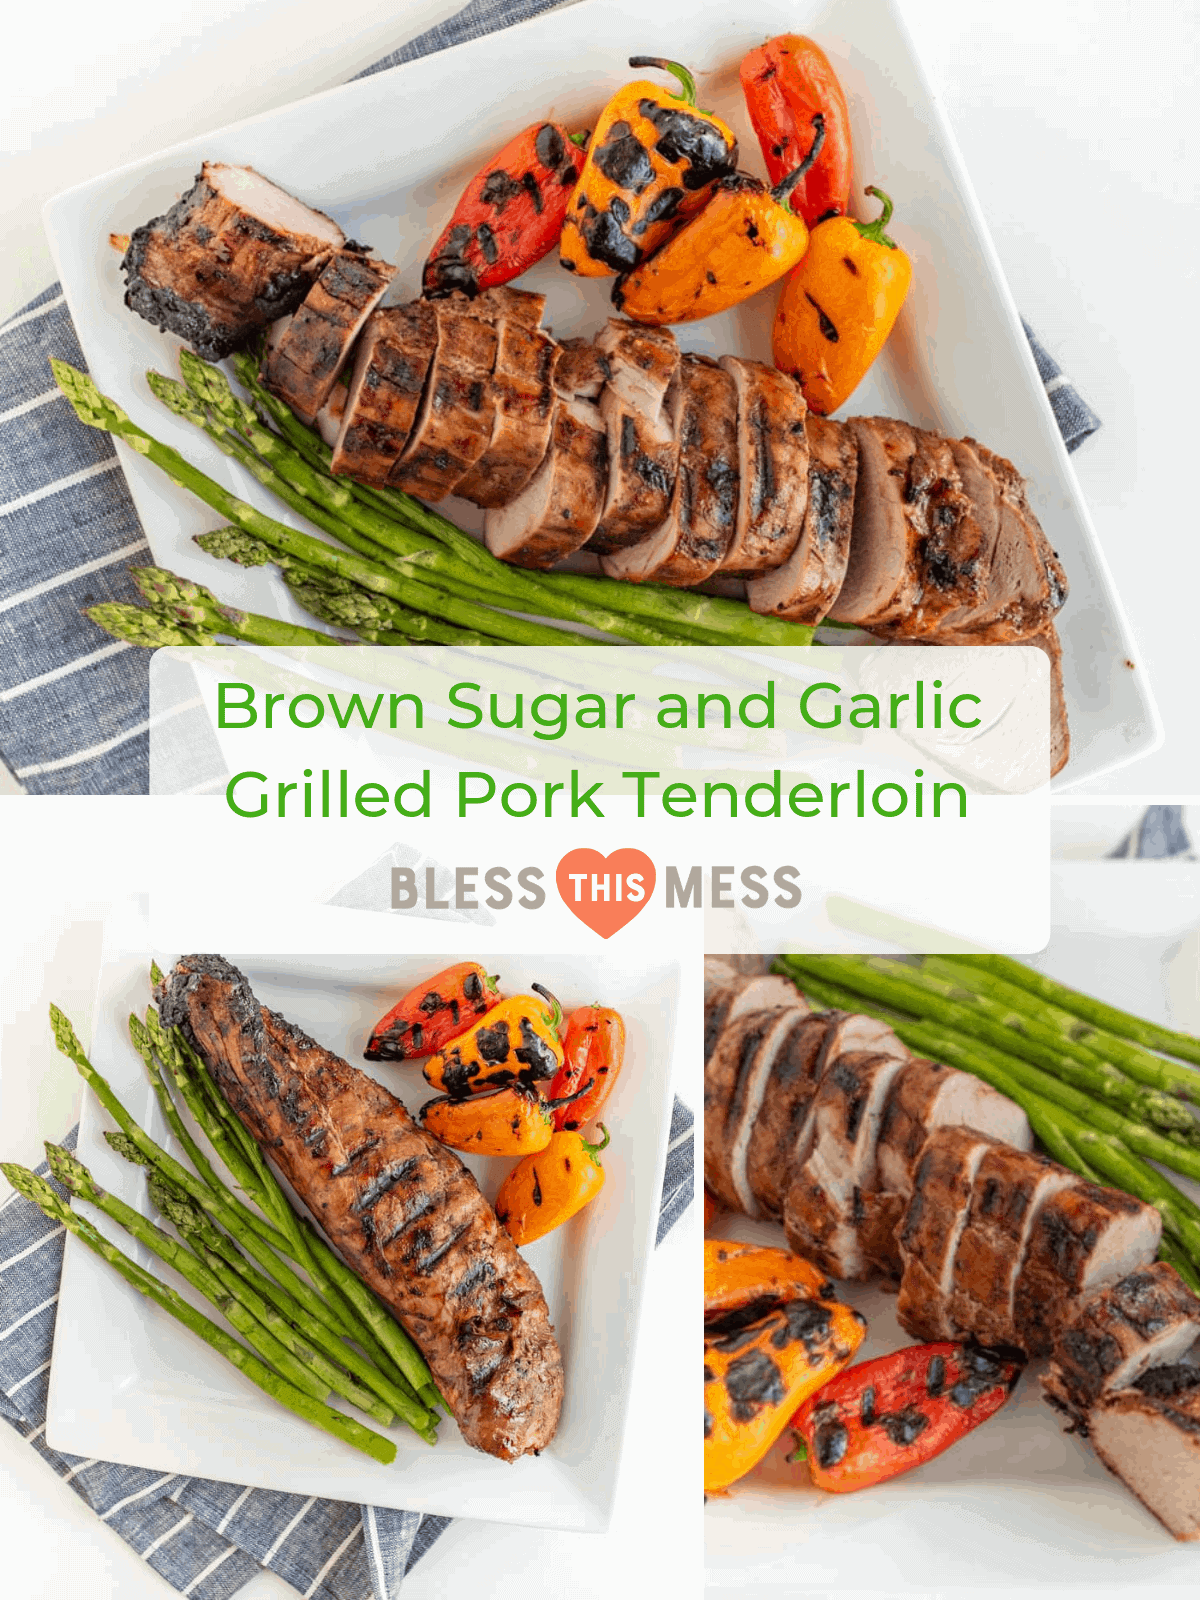 Brown Sugar and Garlic Grilled Pork Tenderloin is robust and smoky with a nice sweet-to-savory ratio. Fire up the grill because this is your new go-to summertime barbecue meat. #grilling #porktenderloin #porkrecipes